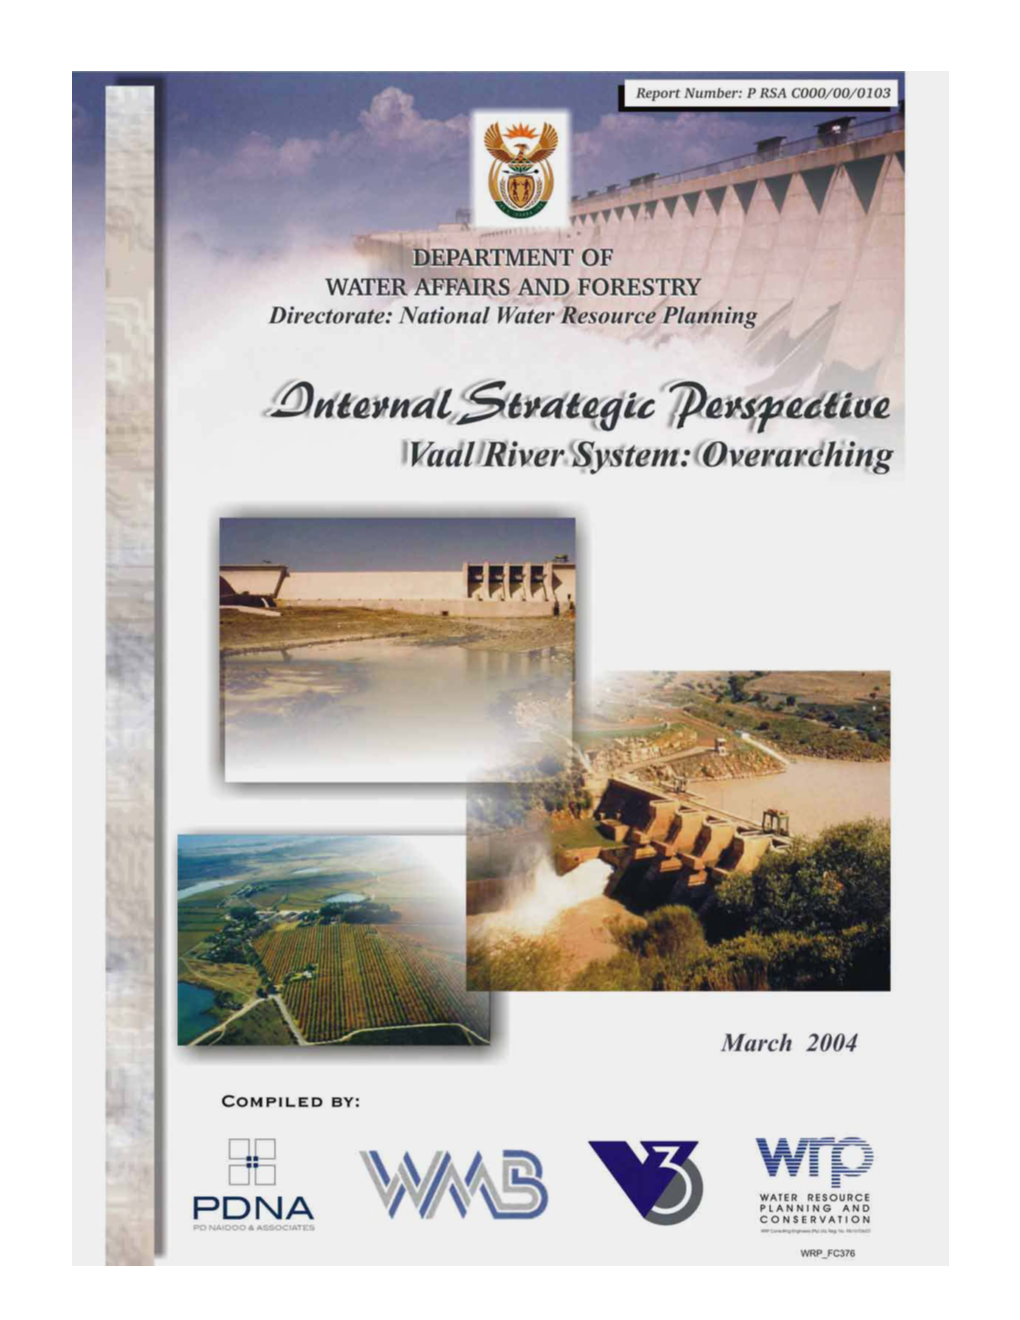 Vaal River System : Overarching Internal Strategic Perspective